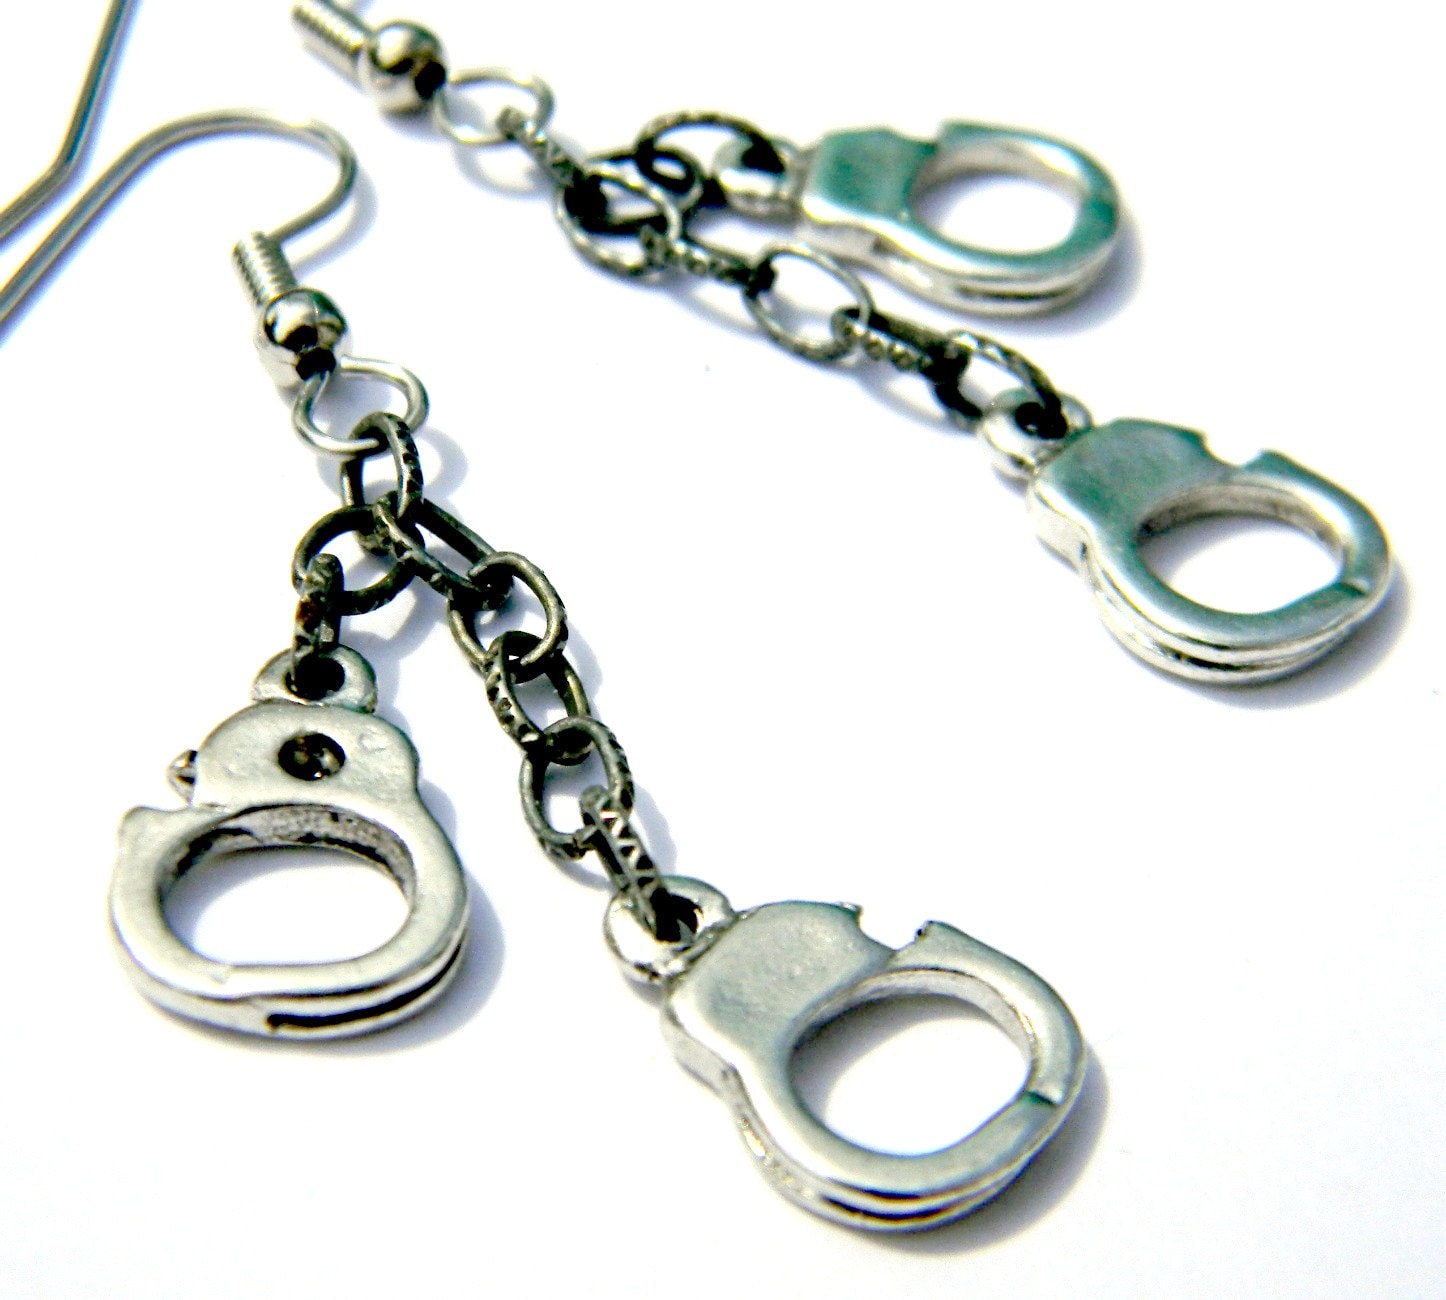 Silver Handcuff Earrings Pewter Handcuffs on by OrionOctober